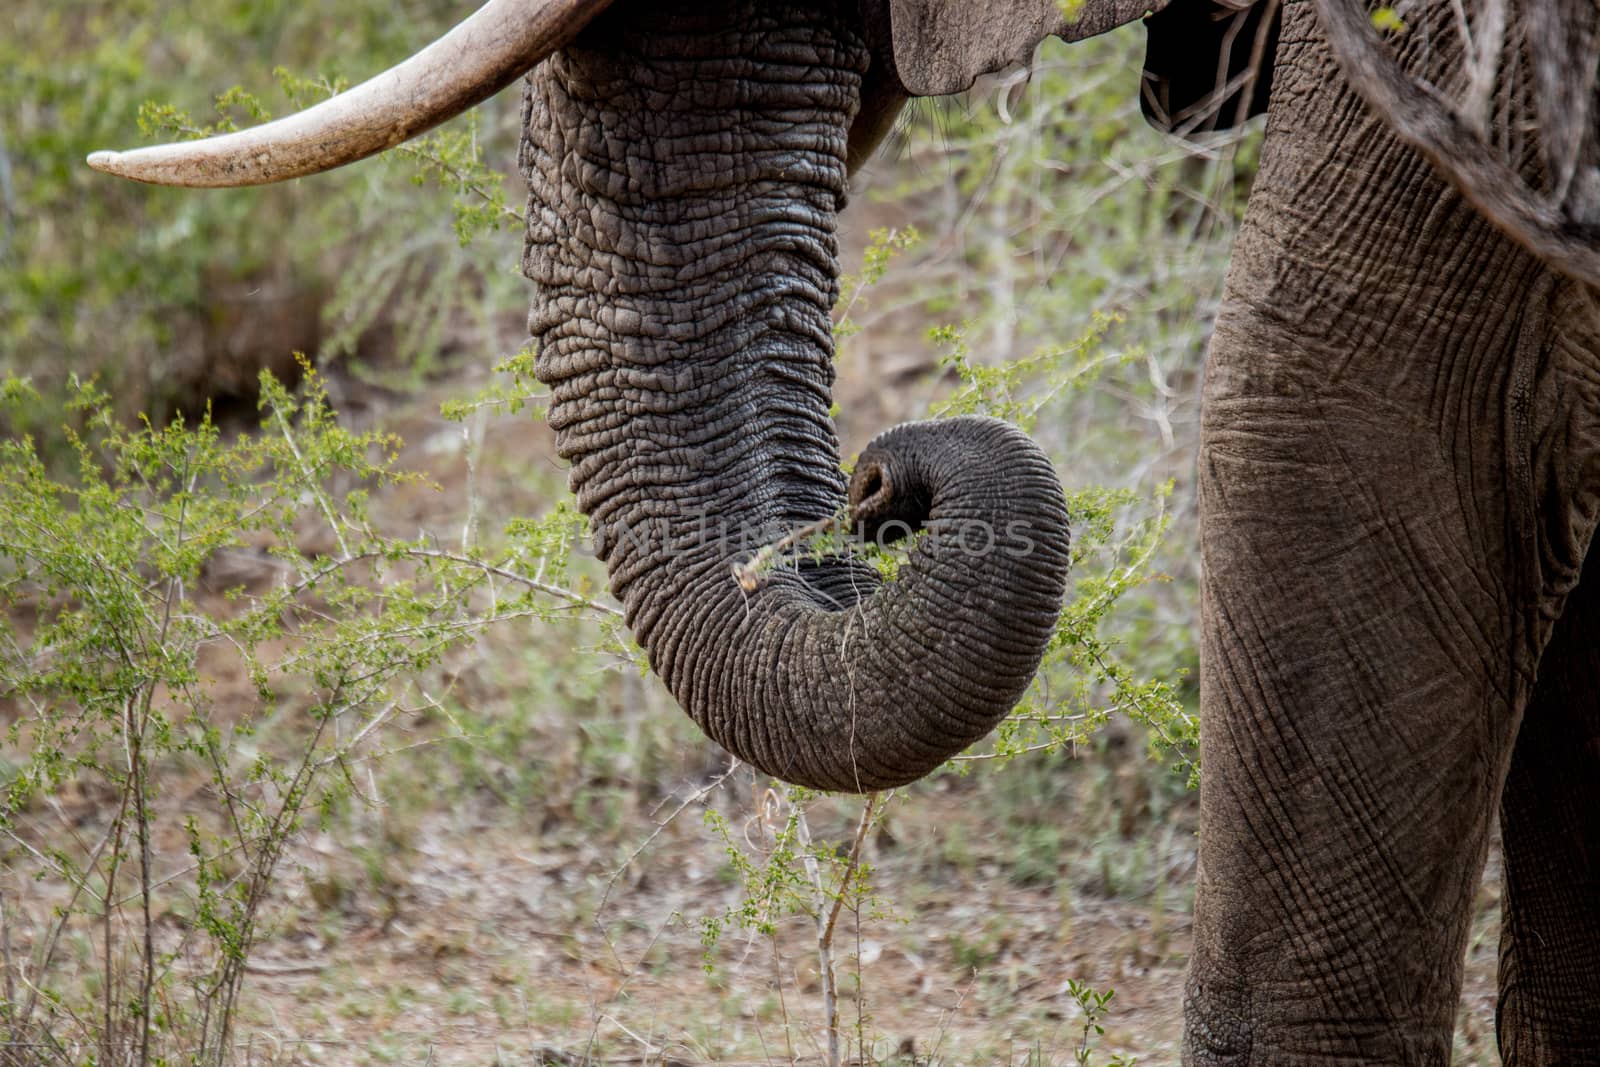 Trunk of an Elephant in the Kruger National Park, South Africa. by Simoneemanphotography